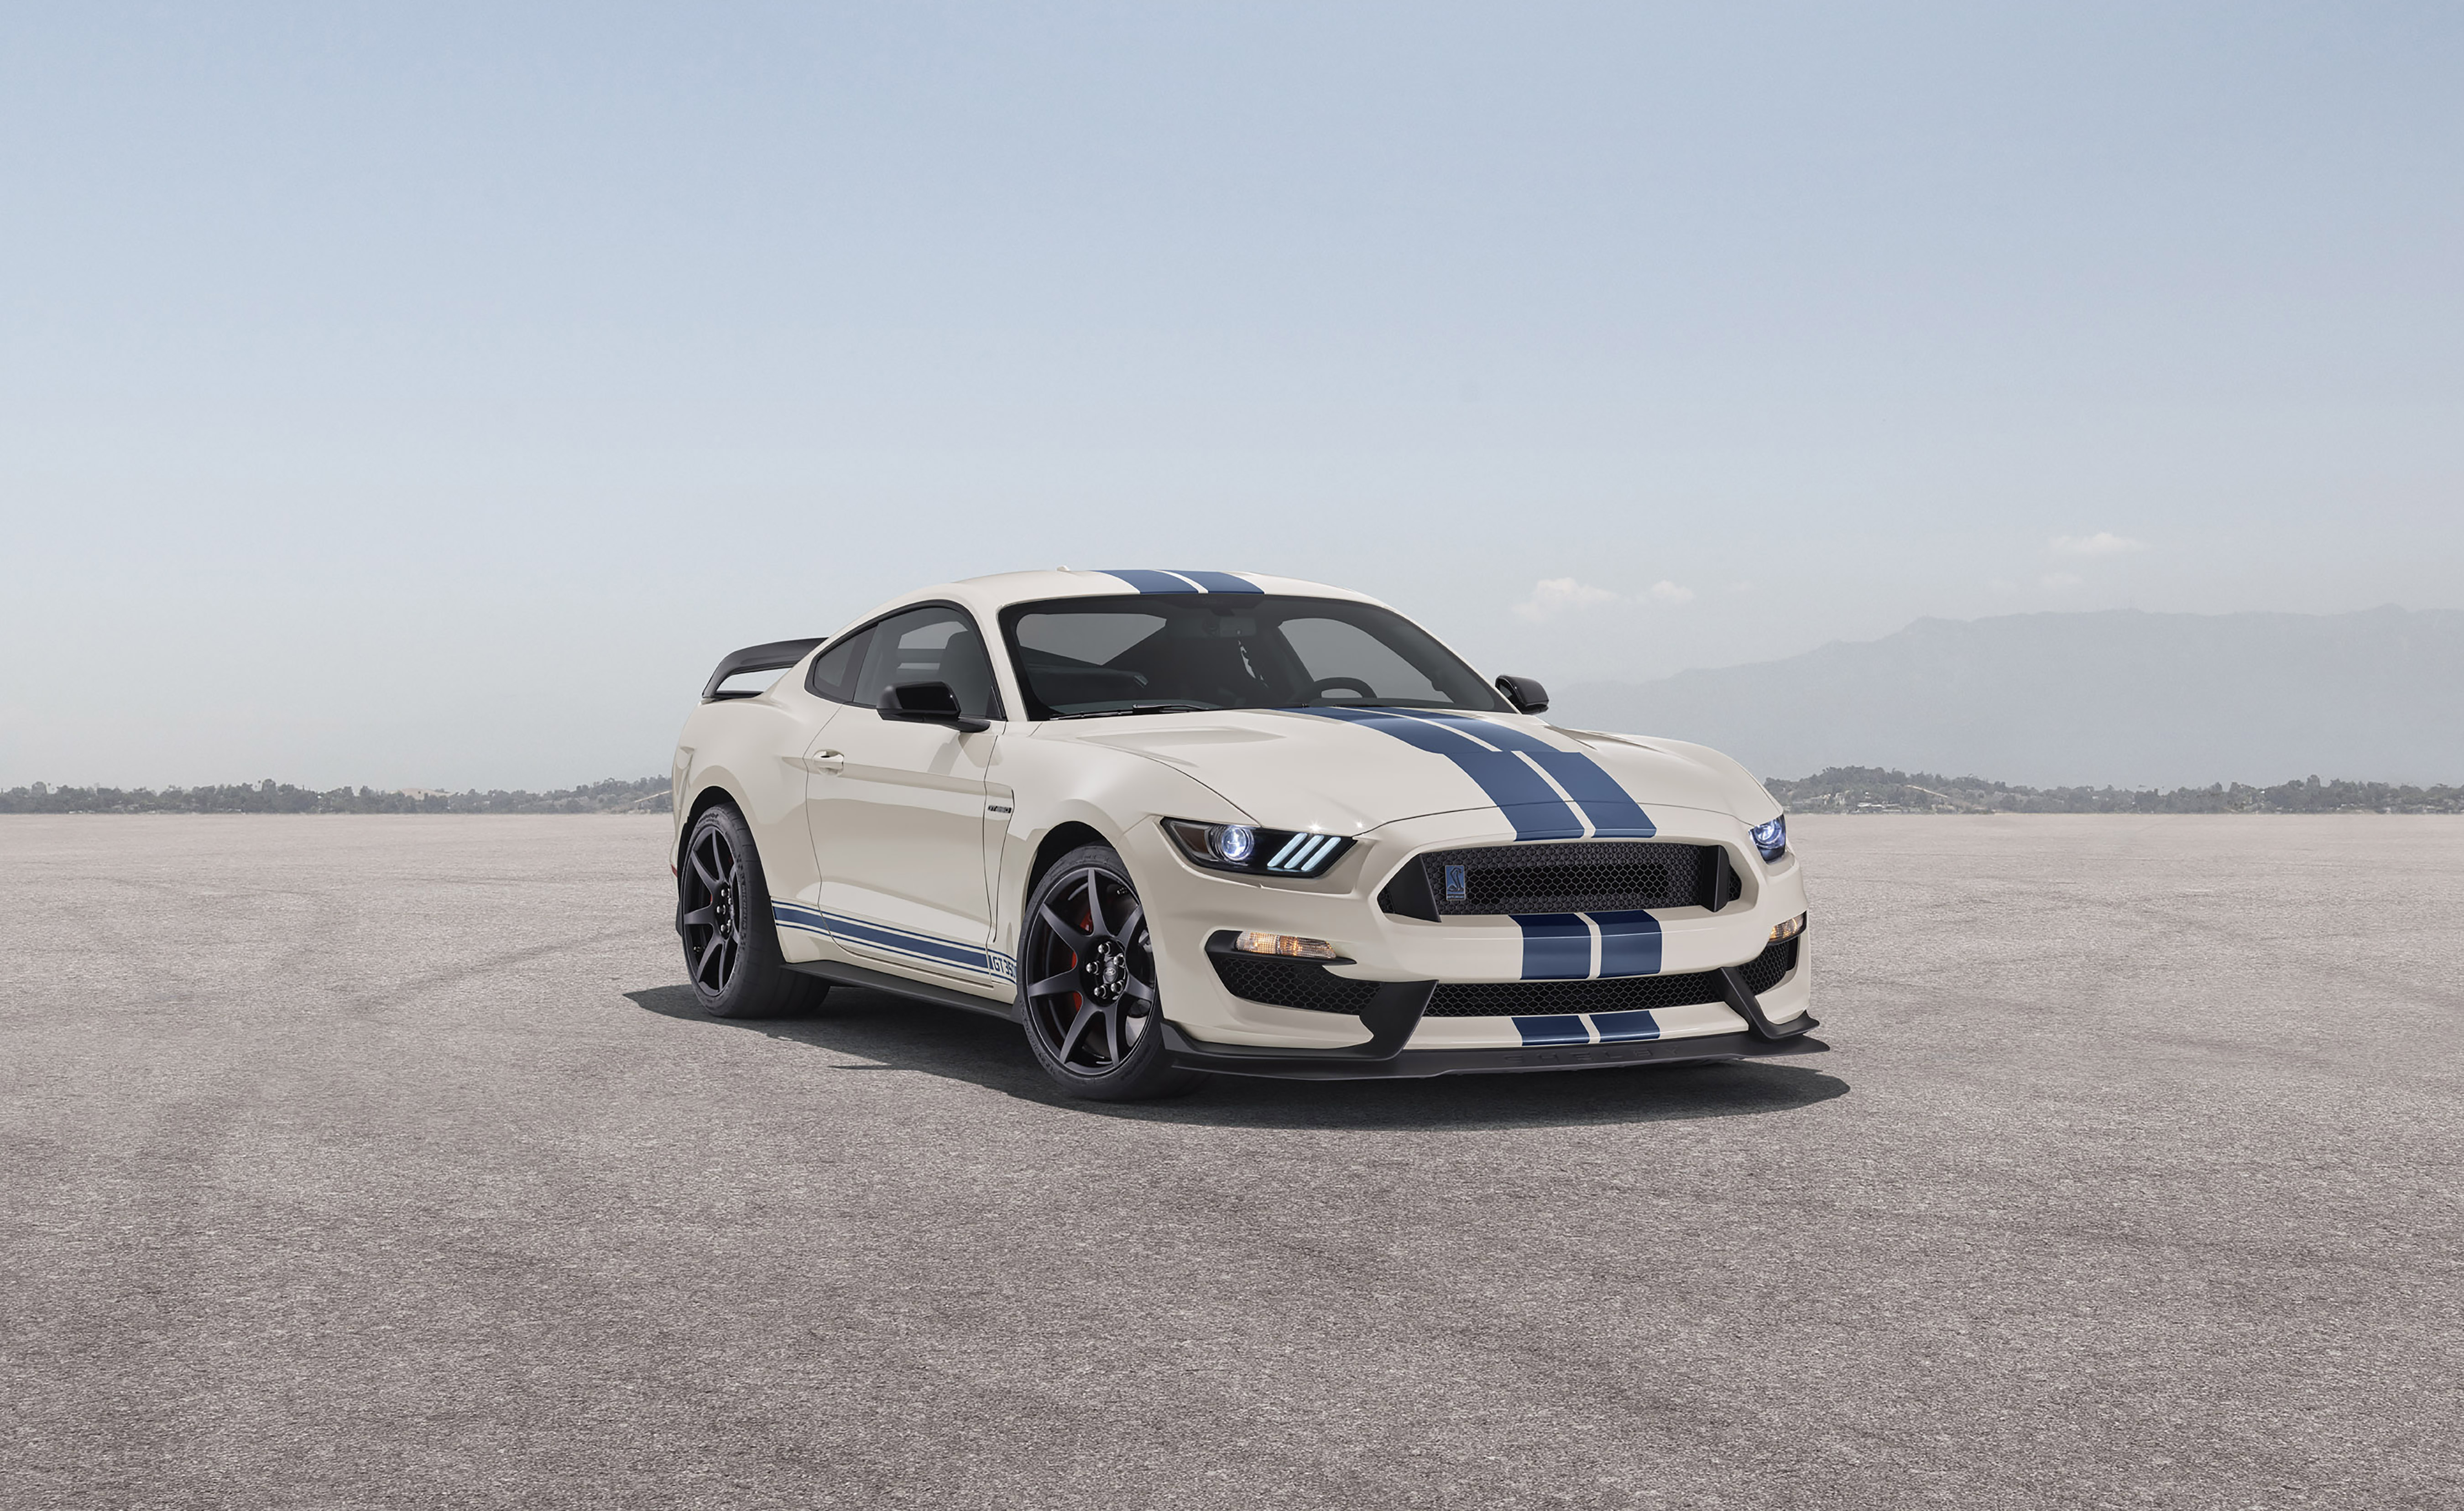 Car Ford Ford Mustang Ford Mustang Shelby Ford Mustang Shelby Gt350 Muscle Car Vehicle White Car 5400x3312